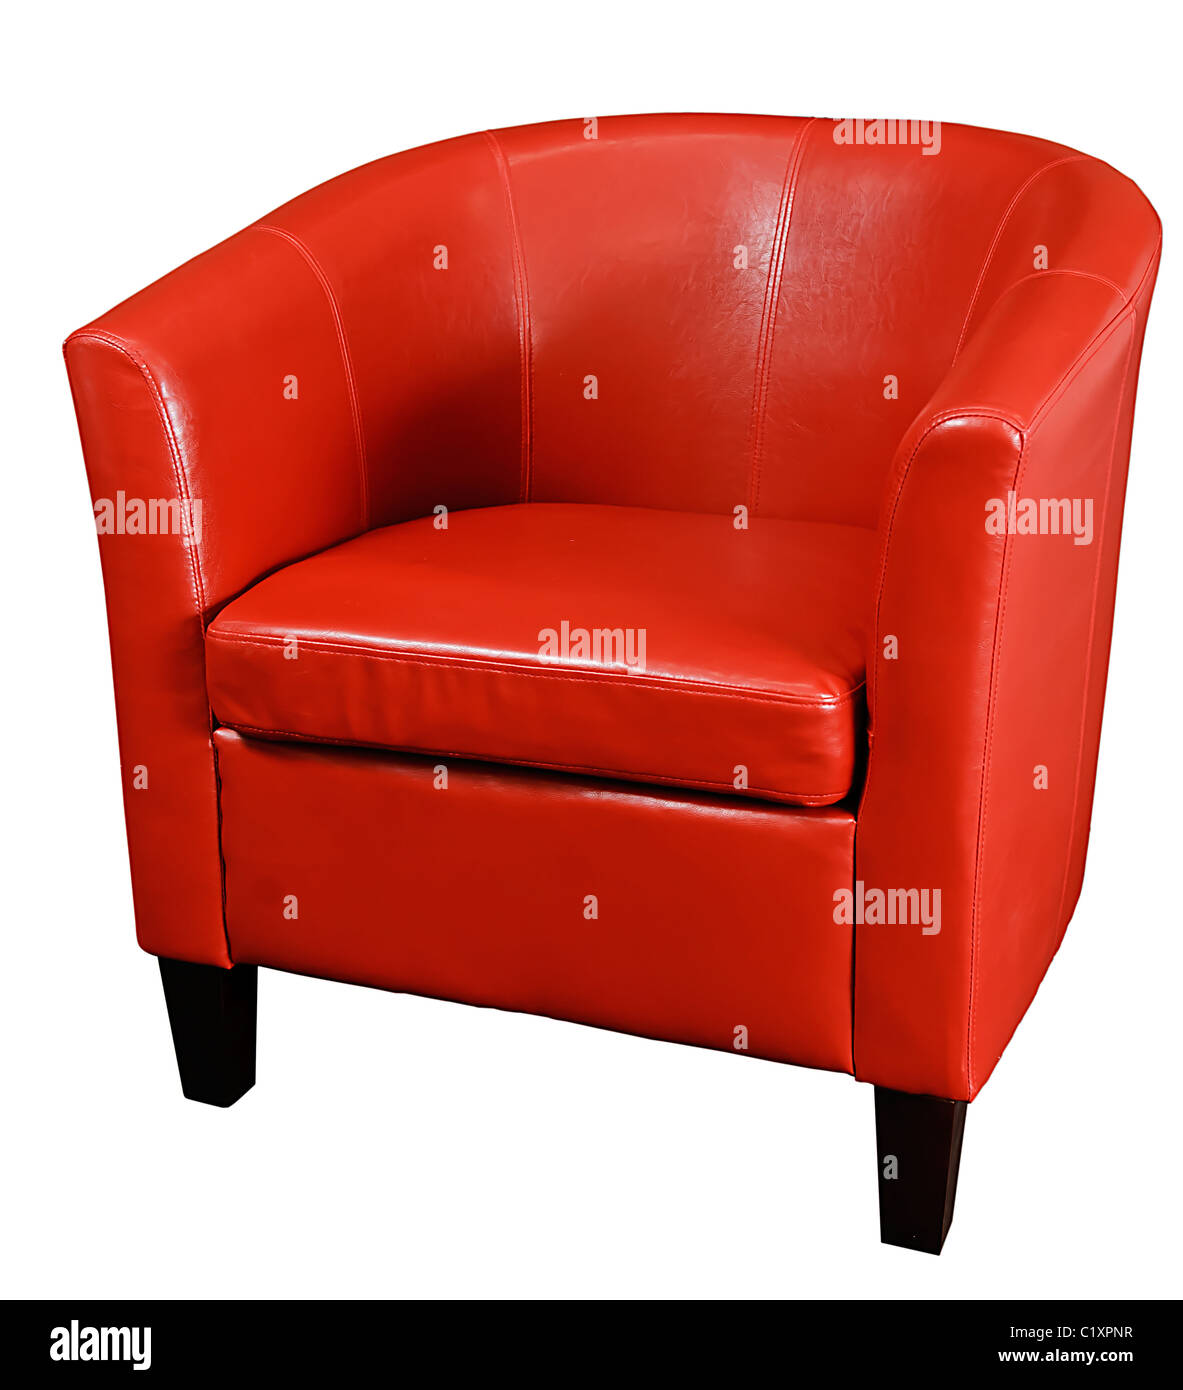 Bright Red leather armchair isolated on a white background Stock Photo